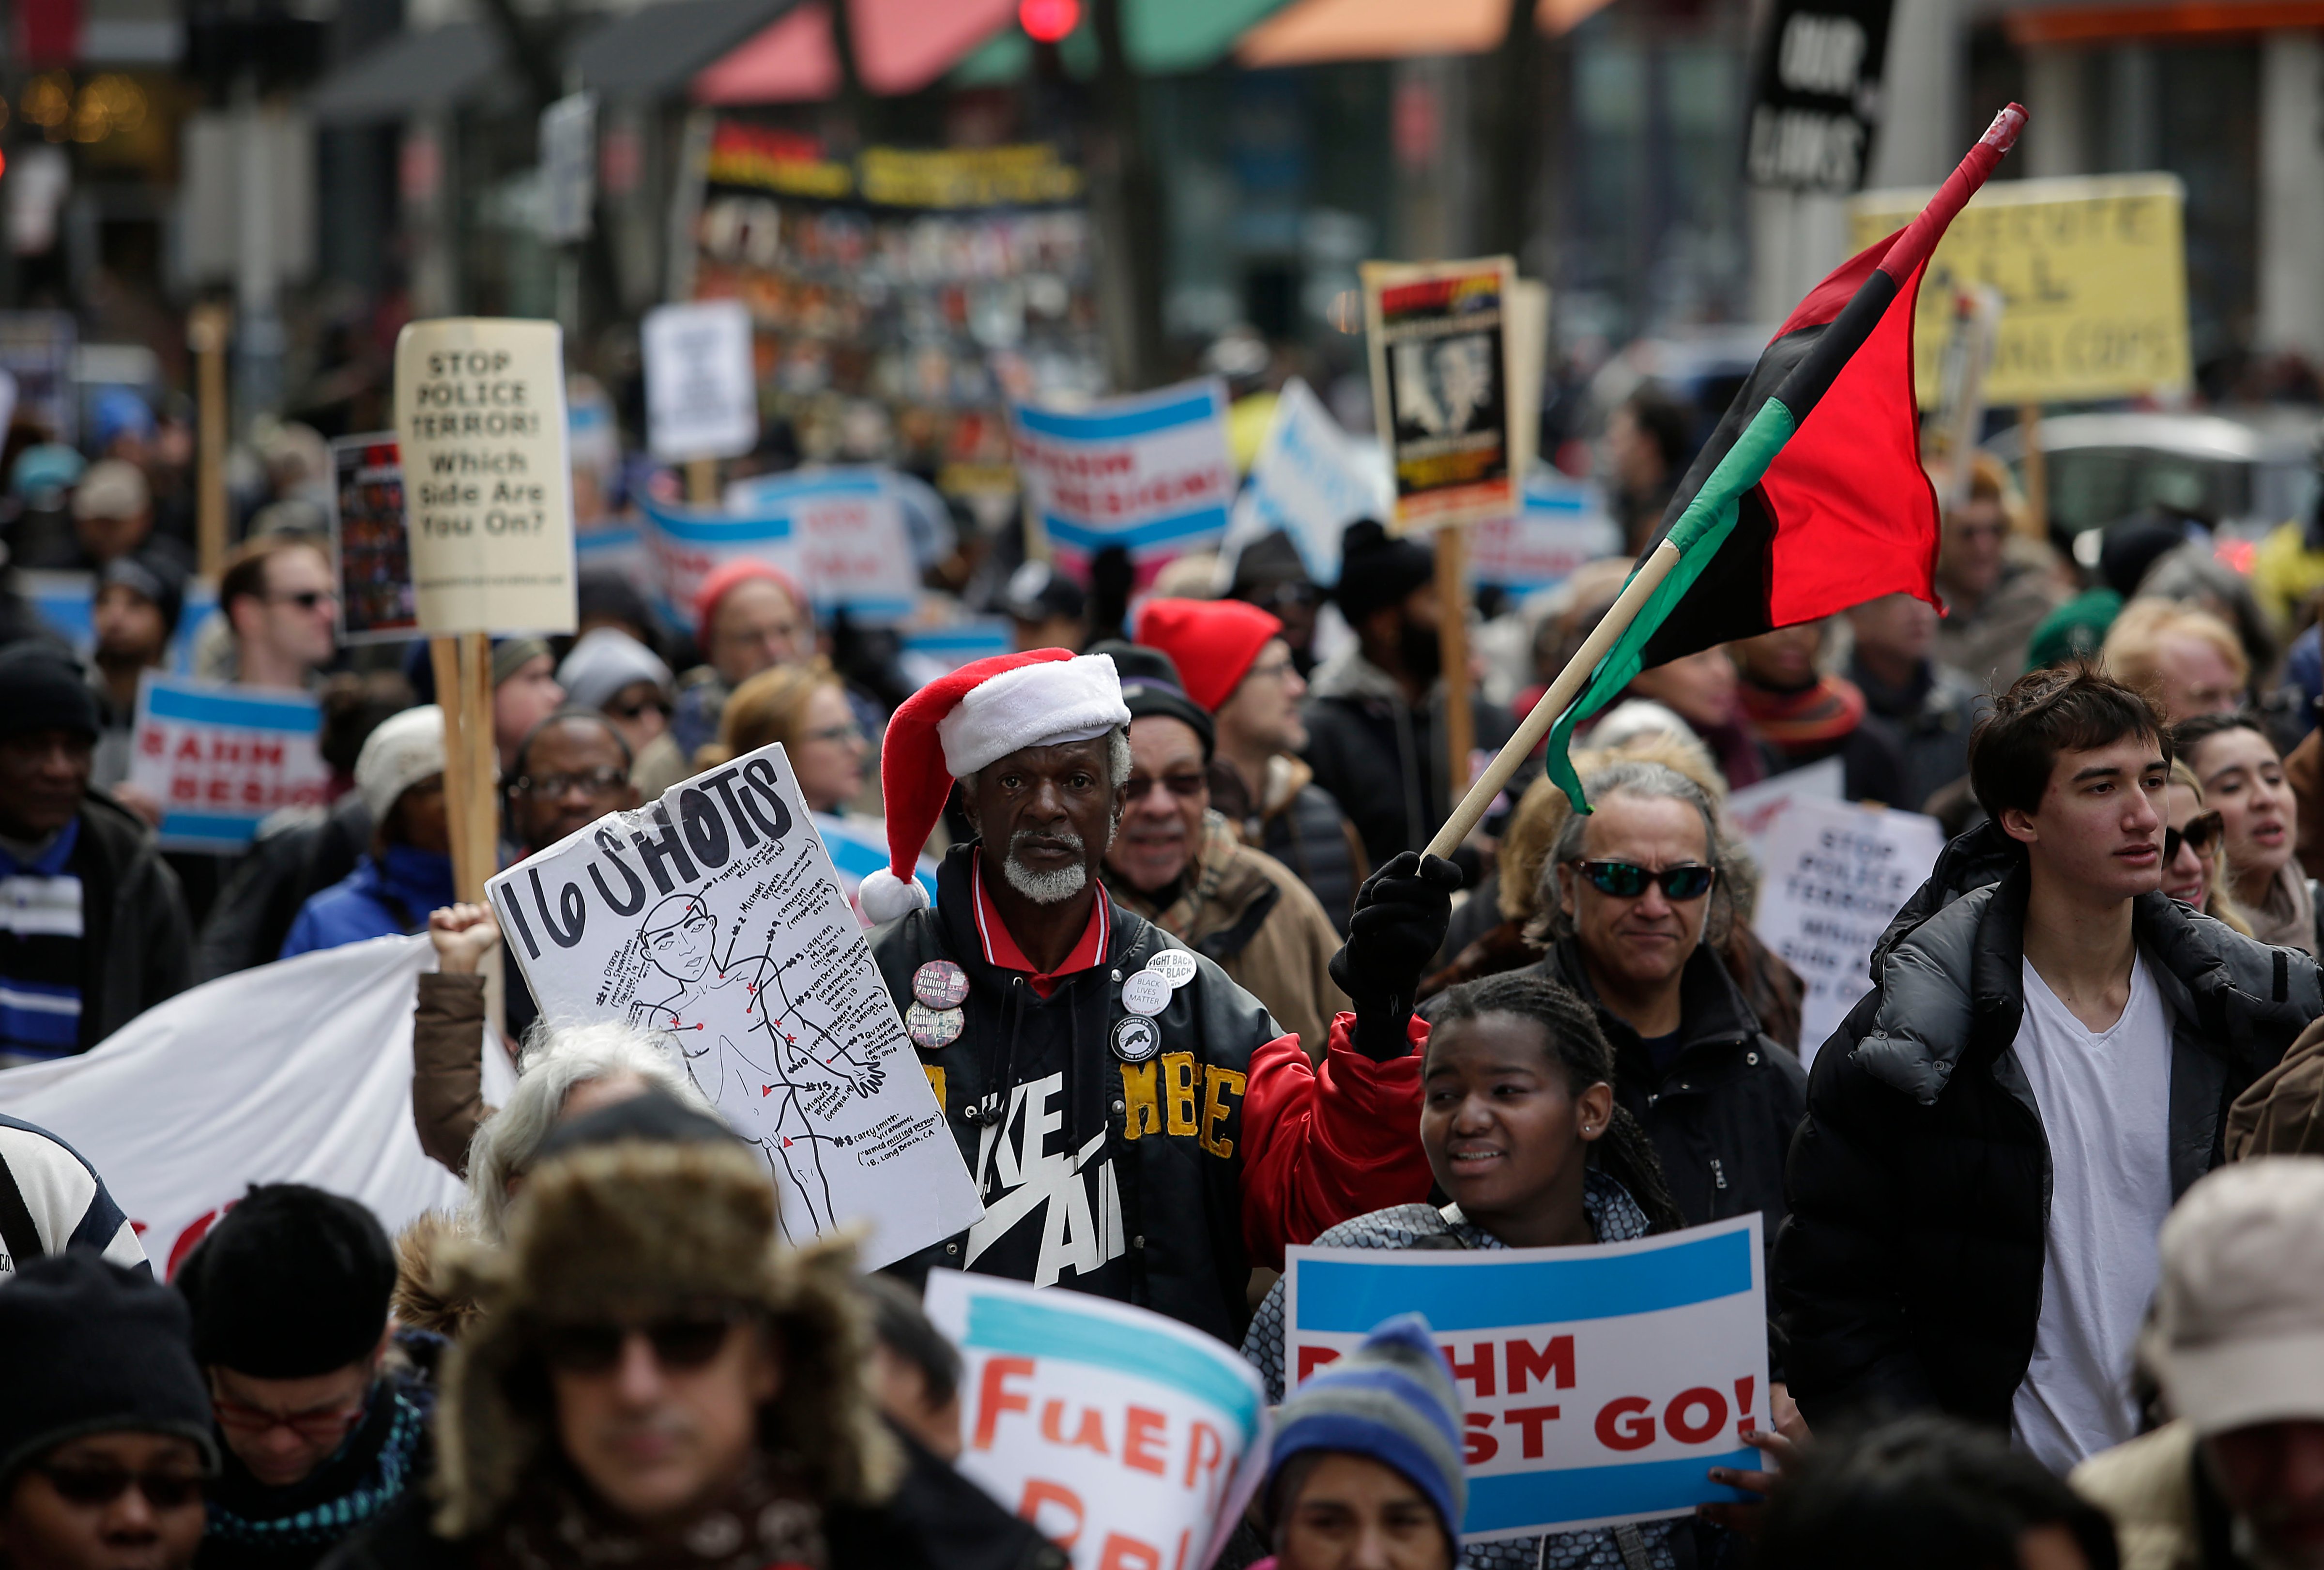 Chicago Protesters Attempt To Disrupt Last Minute Holiday Shopping